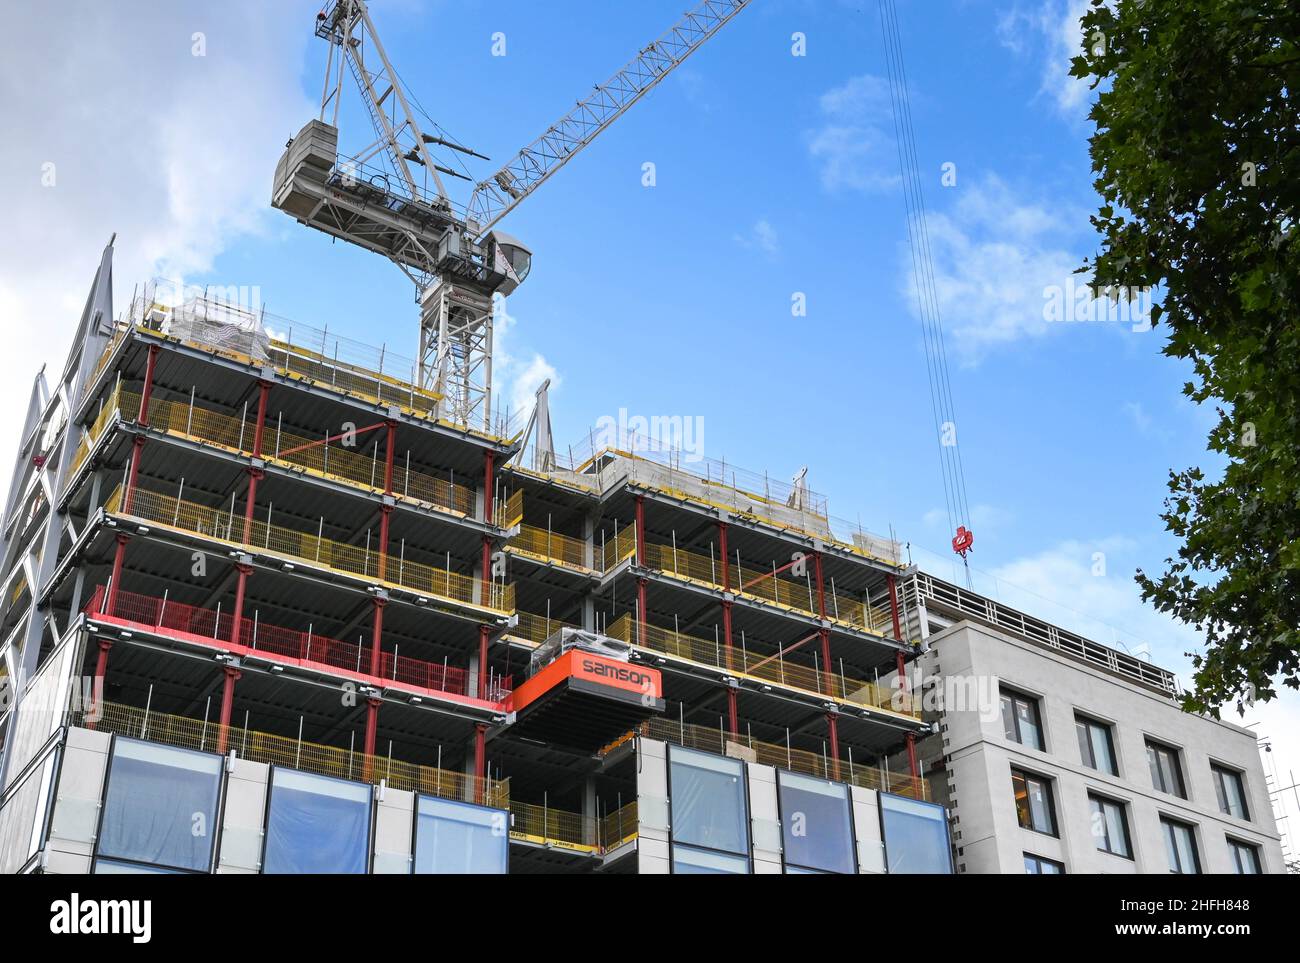 London, England - June 2020: Tower crane working on the side of a tall new building under construction Stock Photo